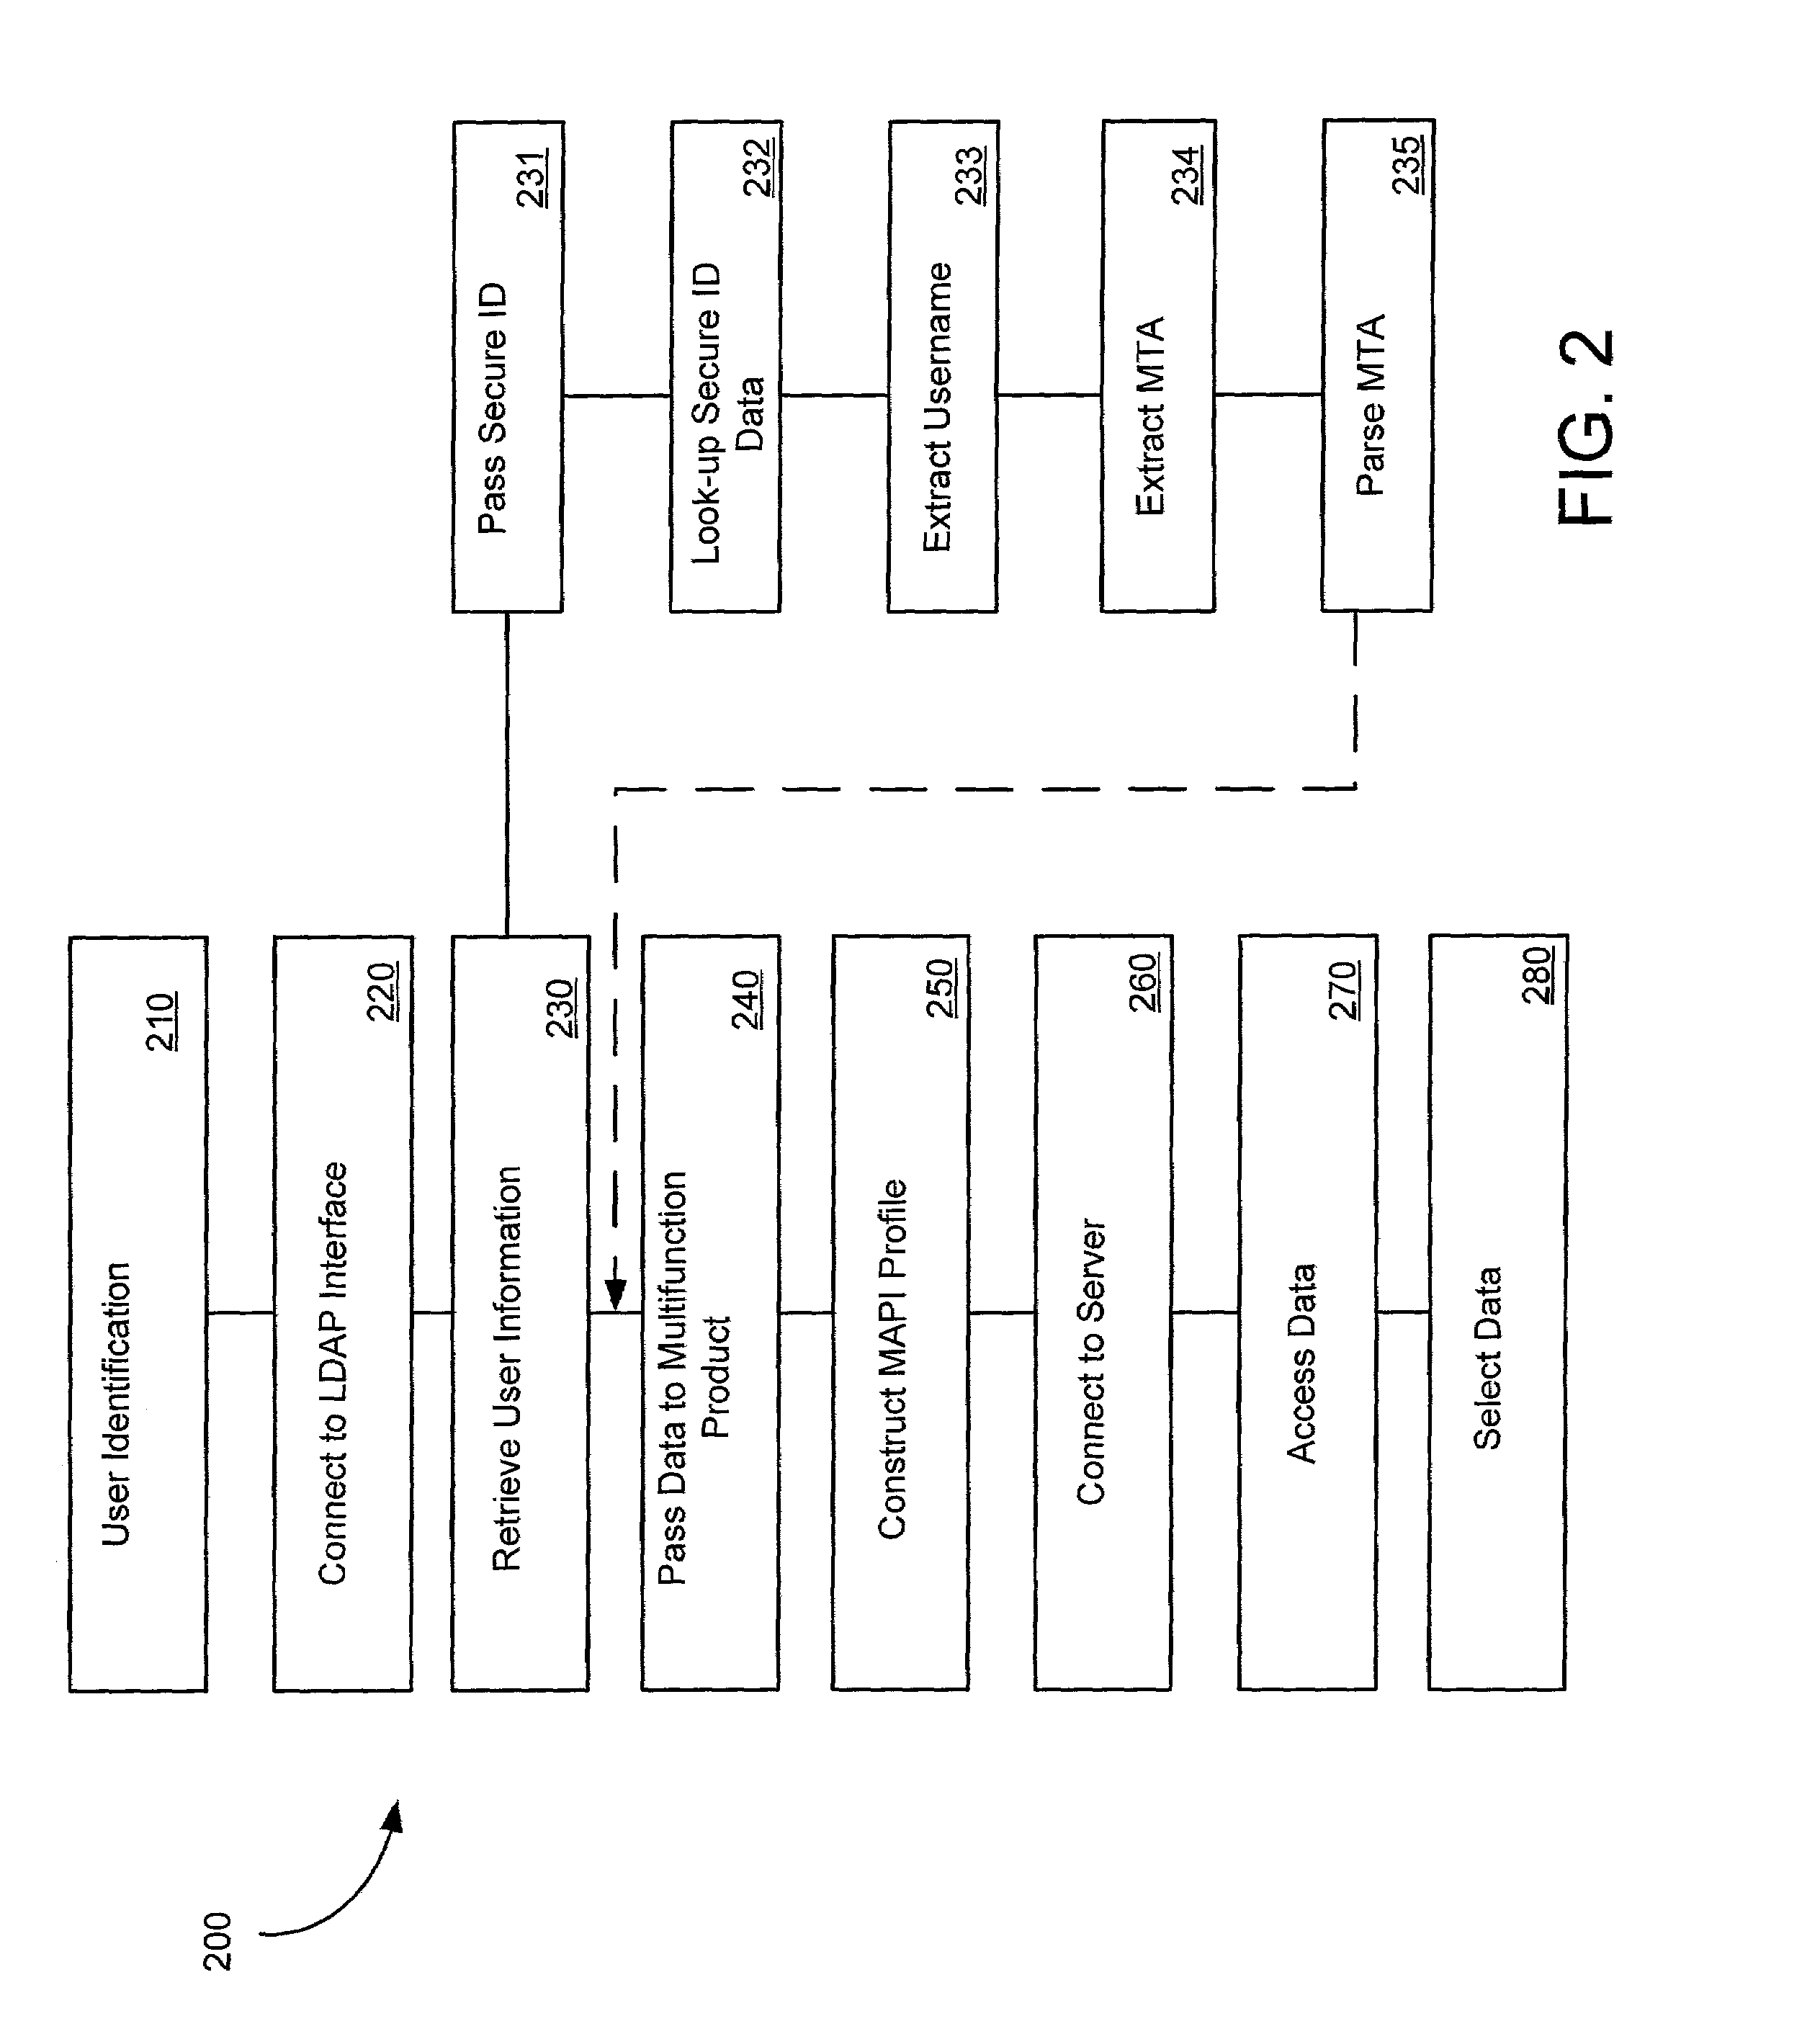 Method and system for obtaining a user's personal address information